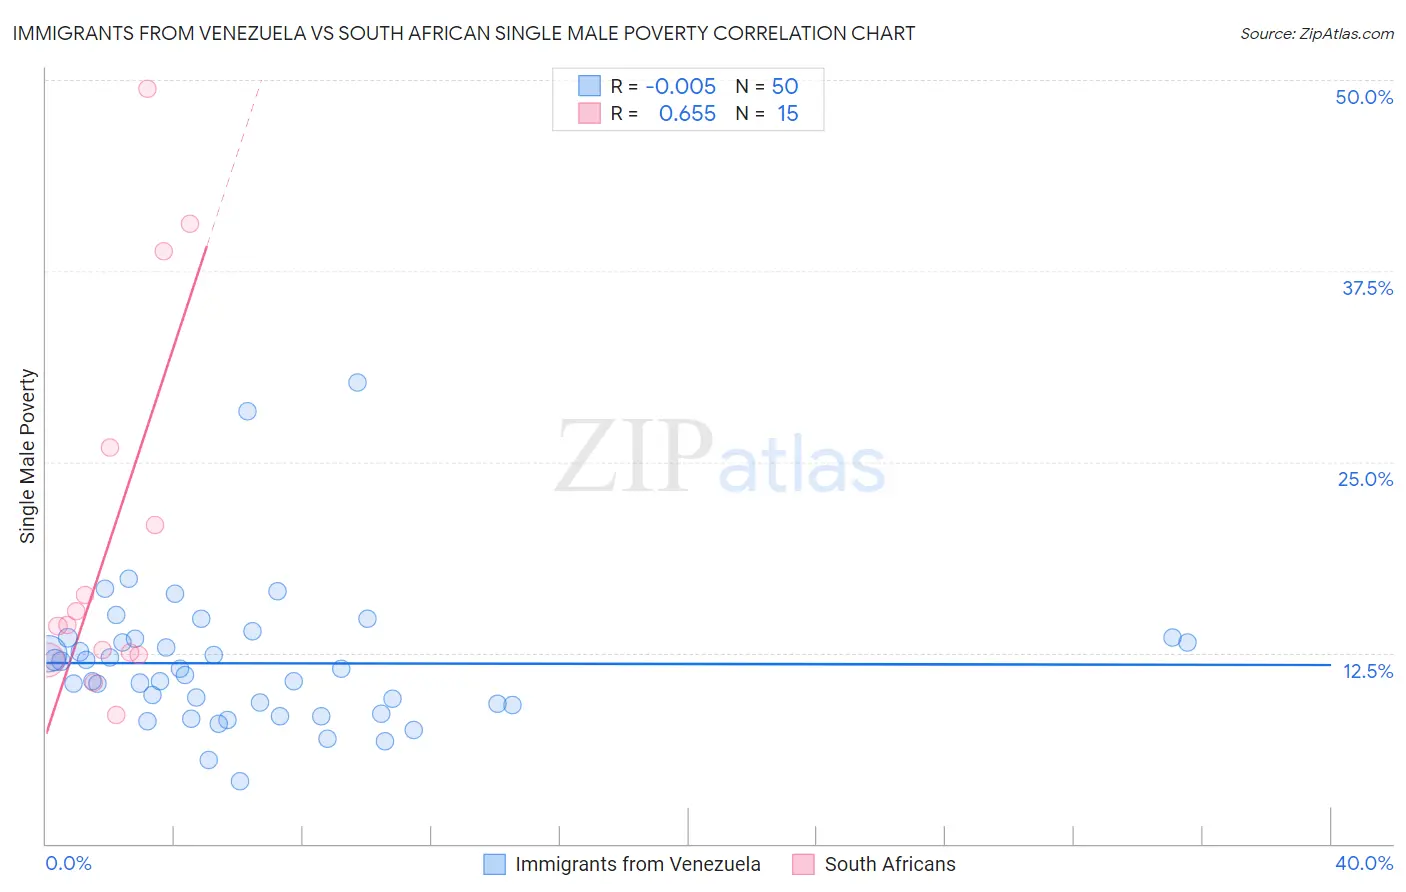 Immigrants from Venezuela vs South African Single Male Poverty